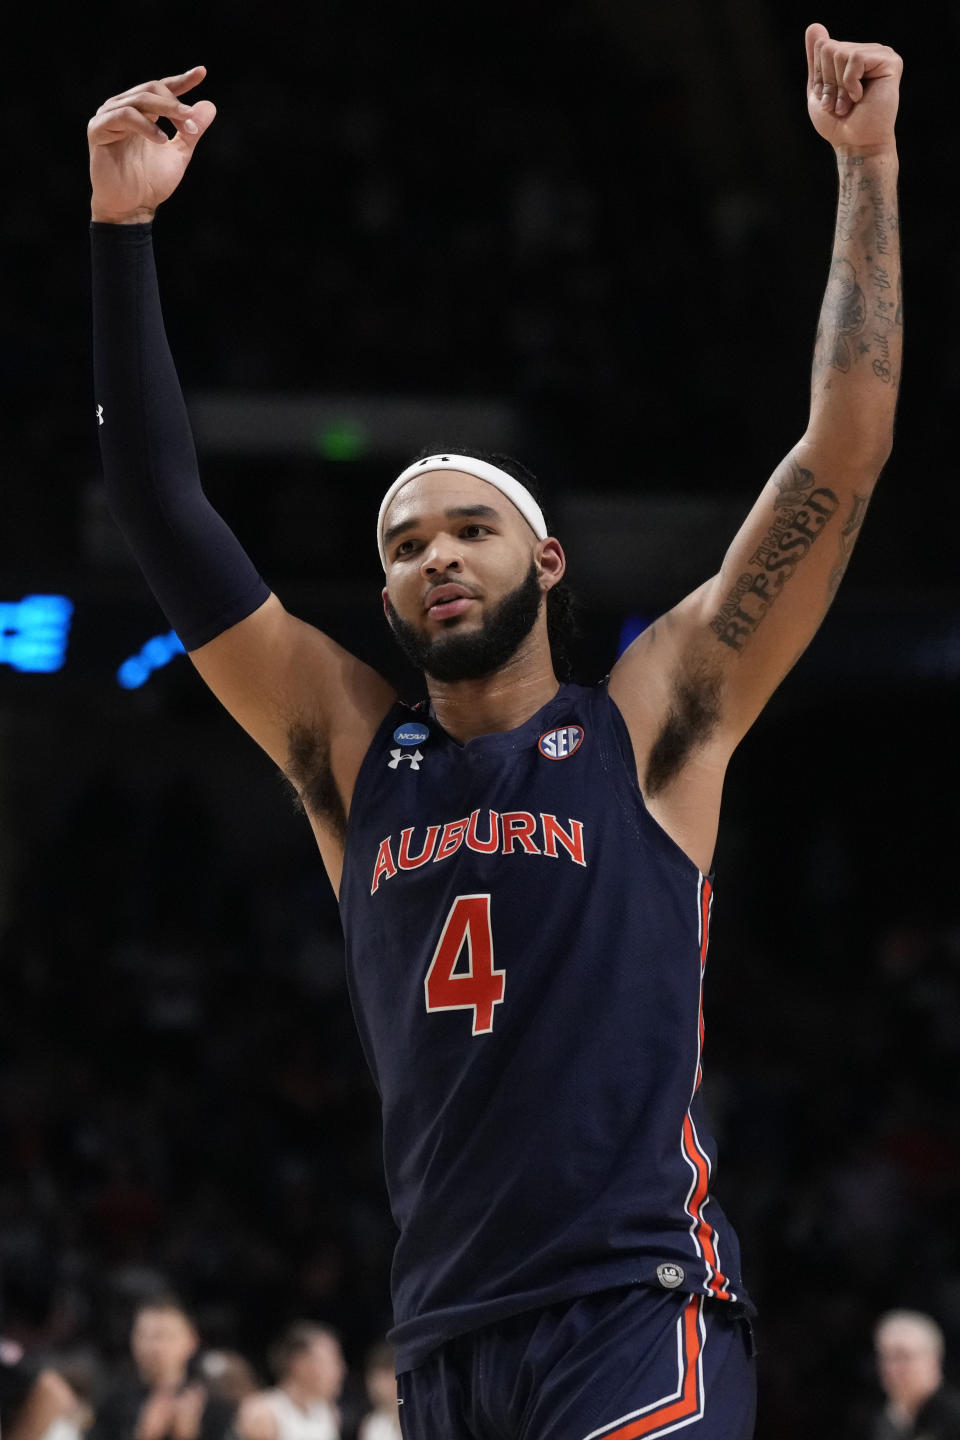 Auburn forward Johni Broome raises his arms as Auburn pulls ahead of Iowa during the second half of a first-round college basketball game in the men's NCAA Tournament in Birmingham, Ala., Thursday, March 16, 2023. Auburn won 83-75. (AP Photo/Rogelio V. Solis)